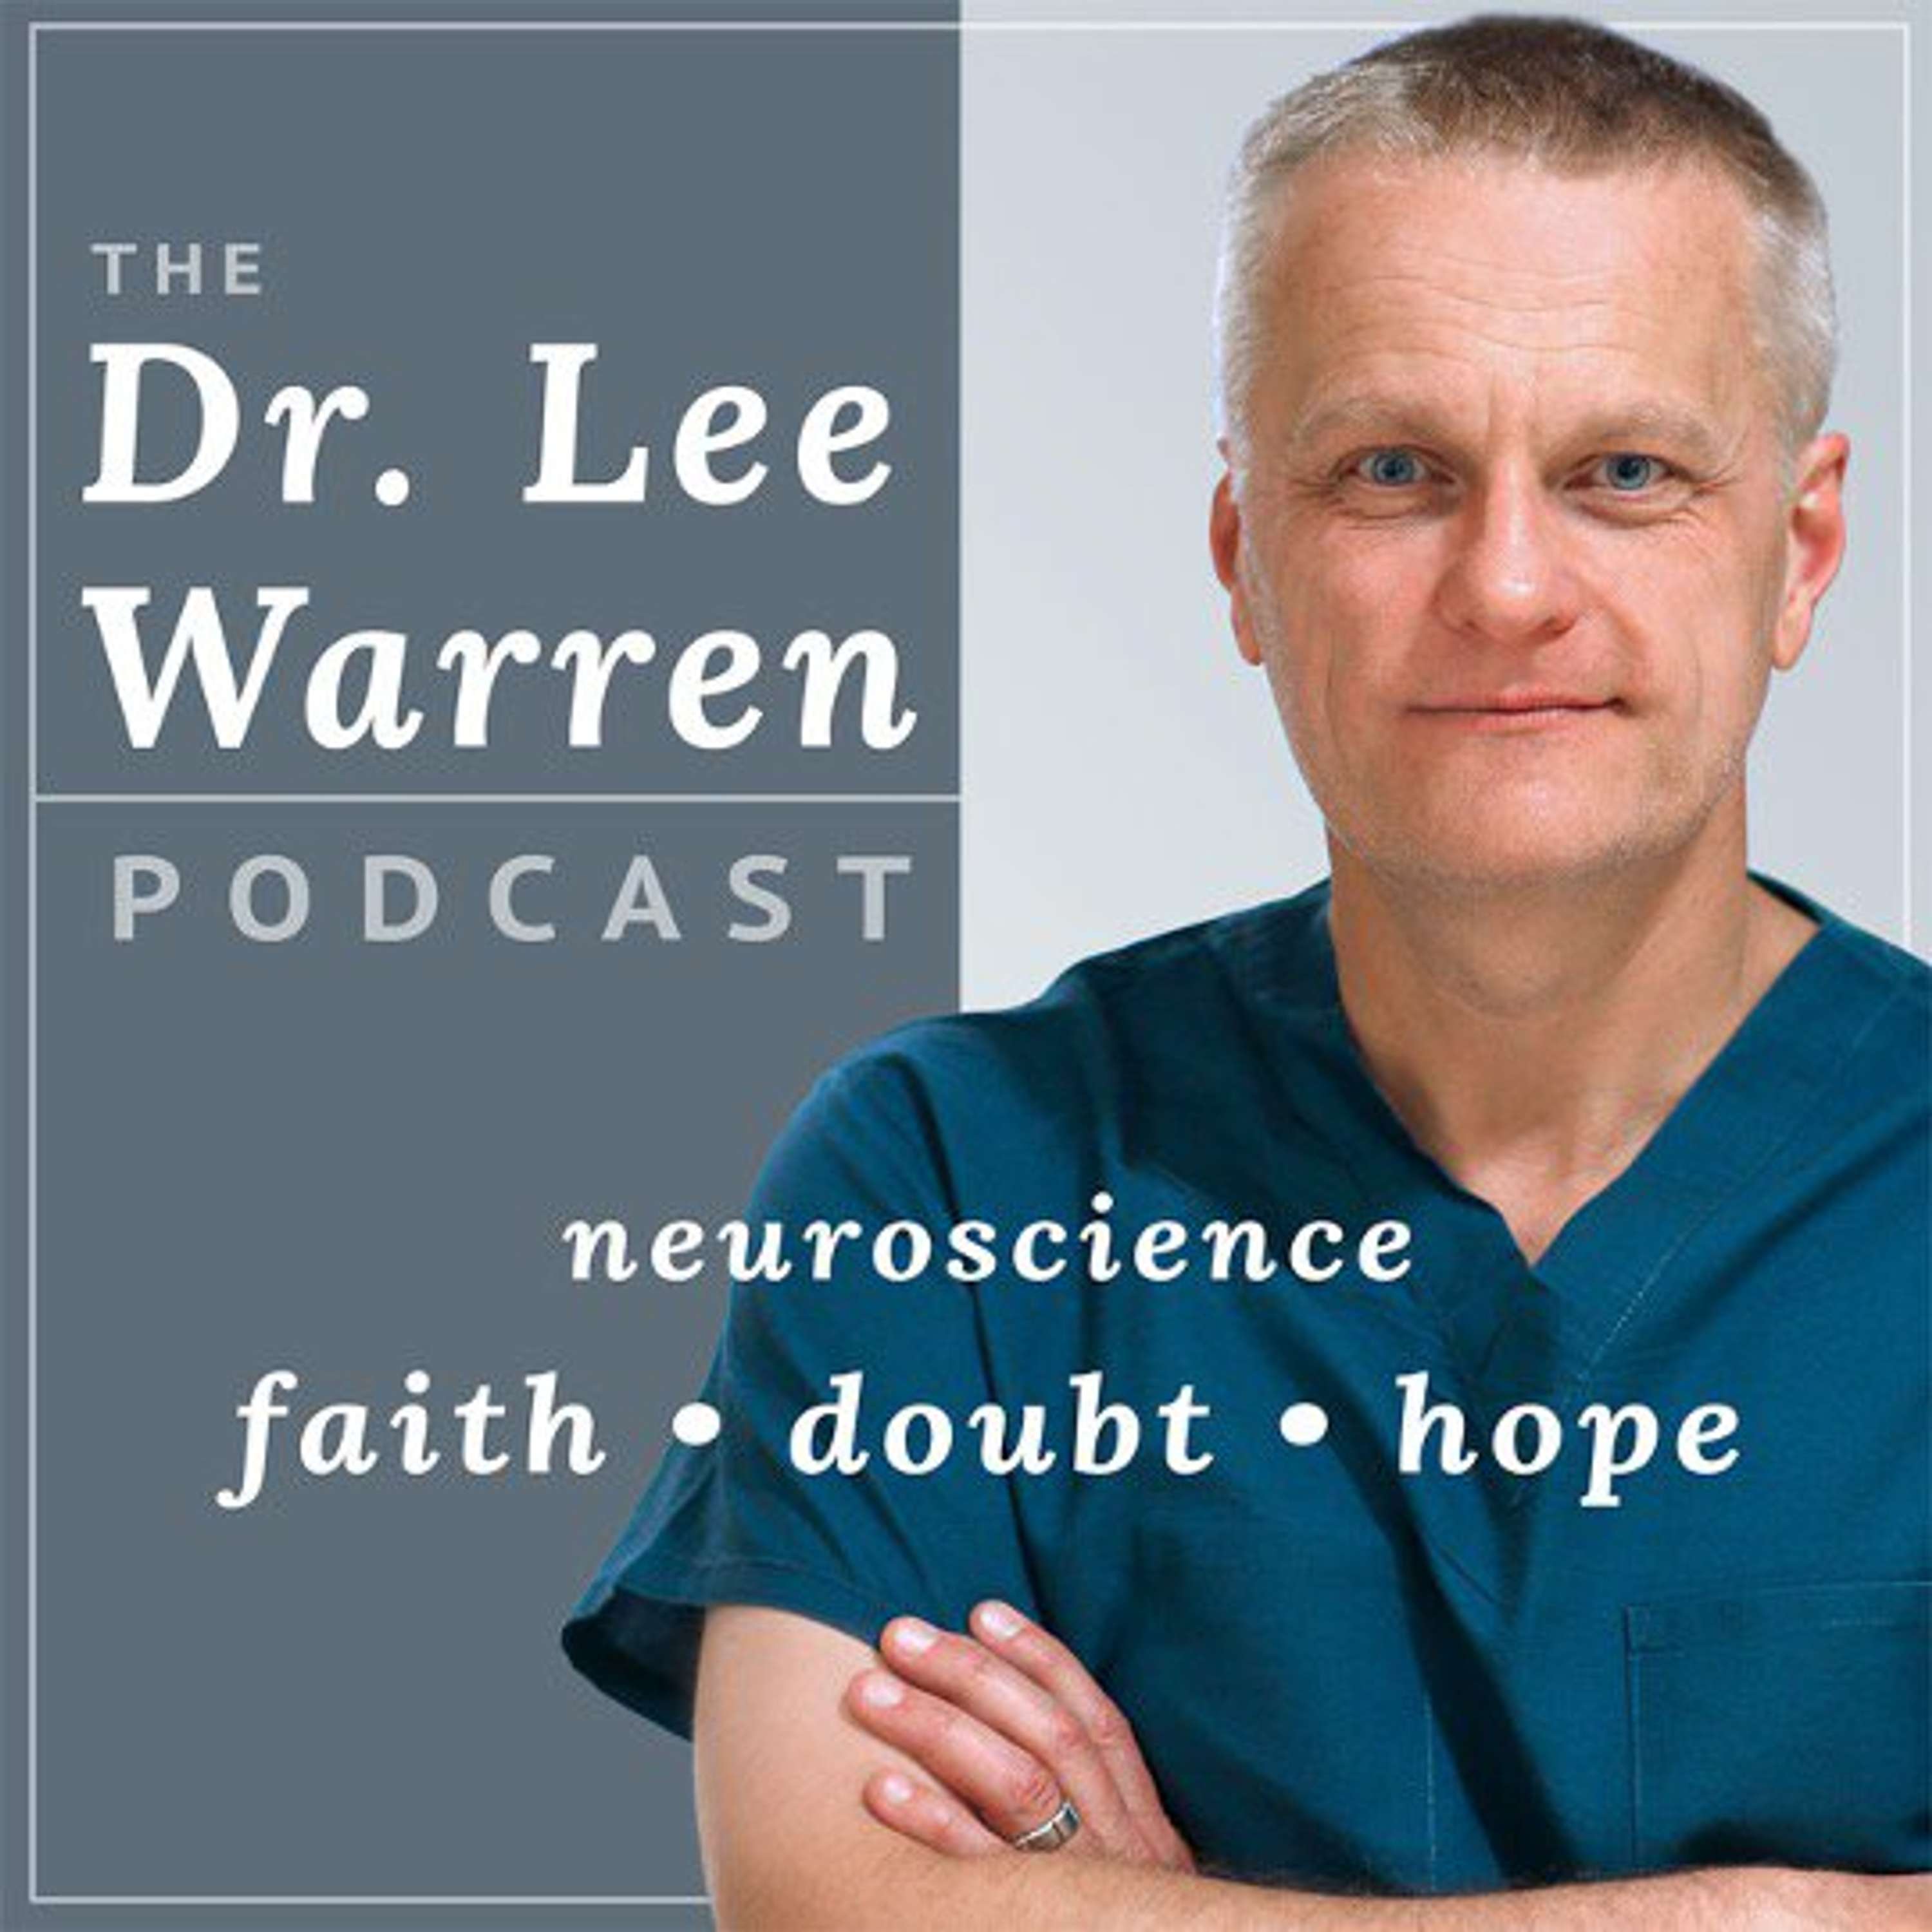 Get In the Fight: The Battle of Self-Brain Surgery